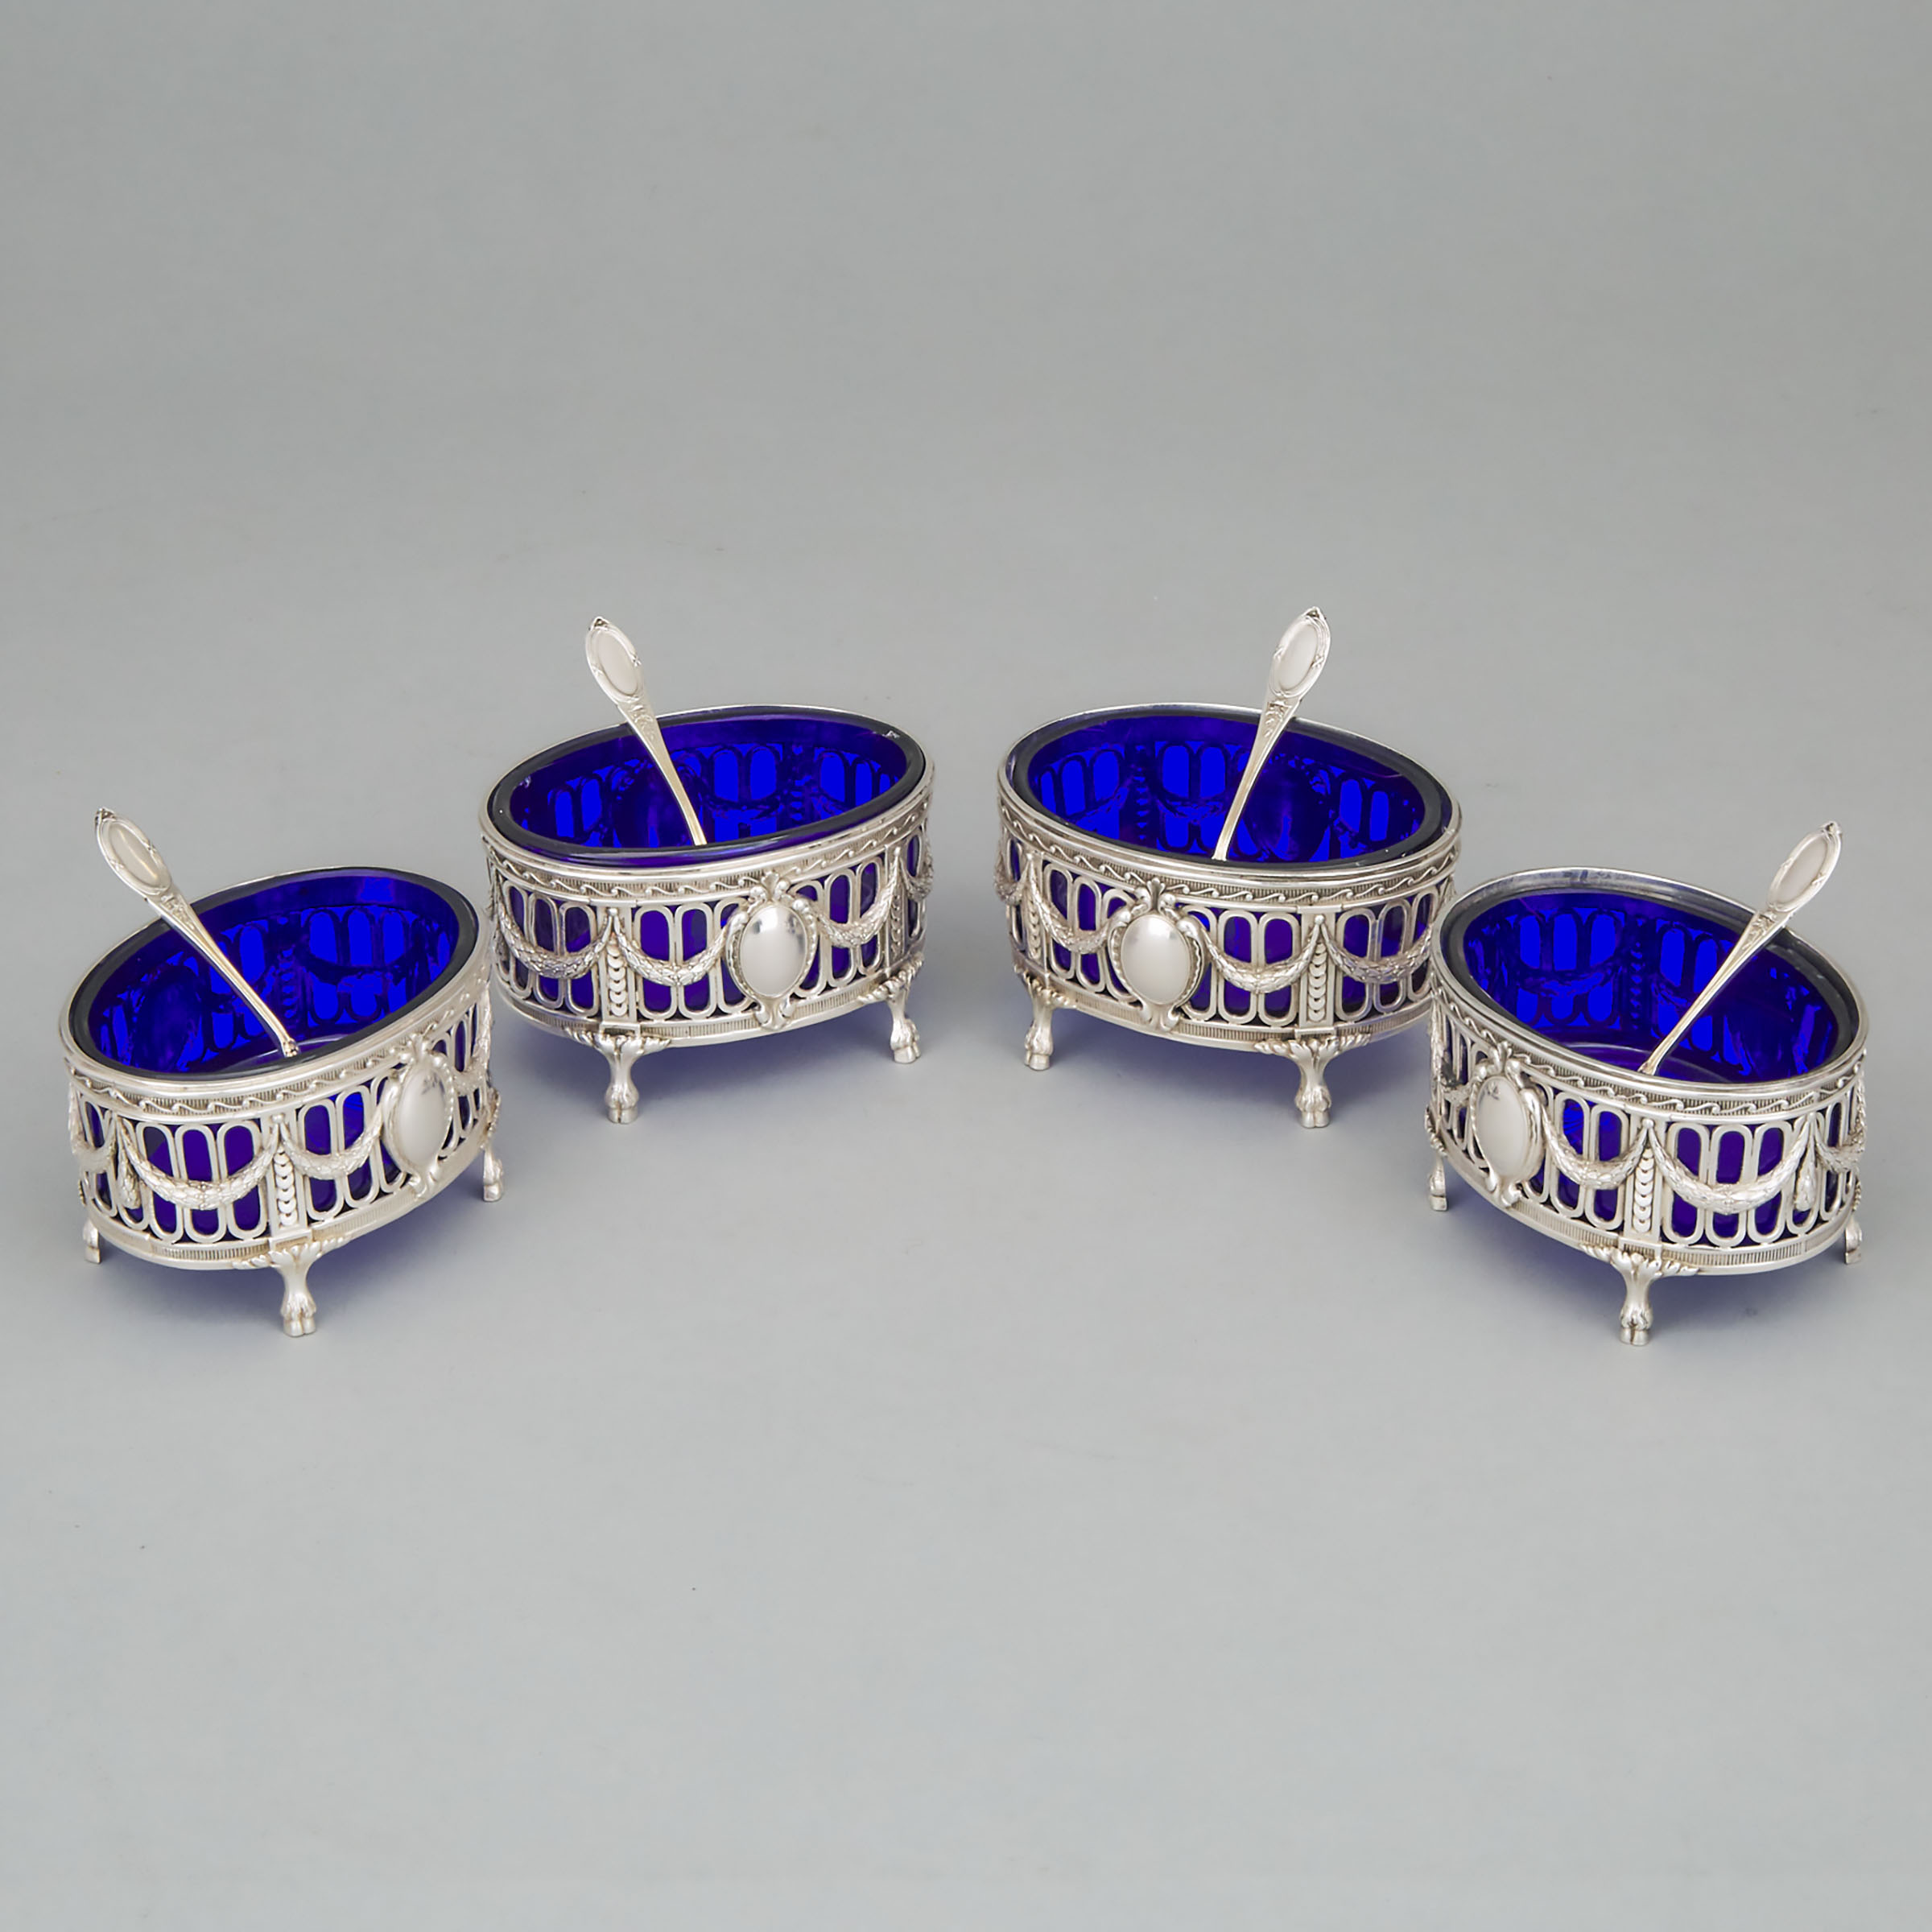 Set of Four French Silver Oval Salt Cellars with Spoons, Hènin & Cie., Paris, early 20th century